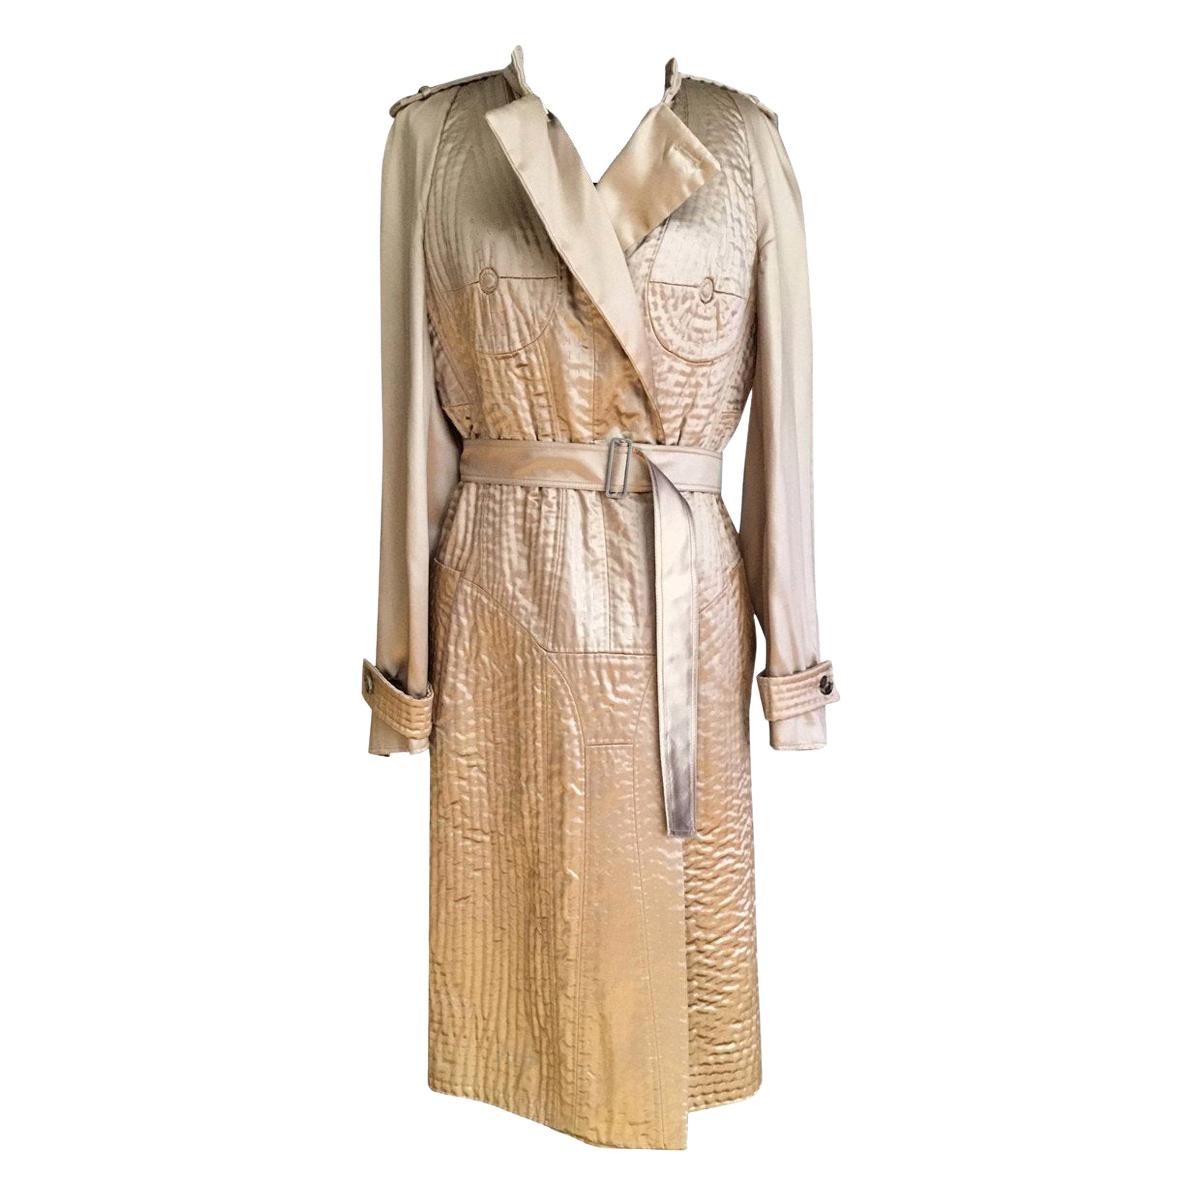 F/W 2003 Vintage Tom Ford for Yves Saint Laurent Nude Embroidered Trench Coat